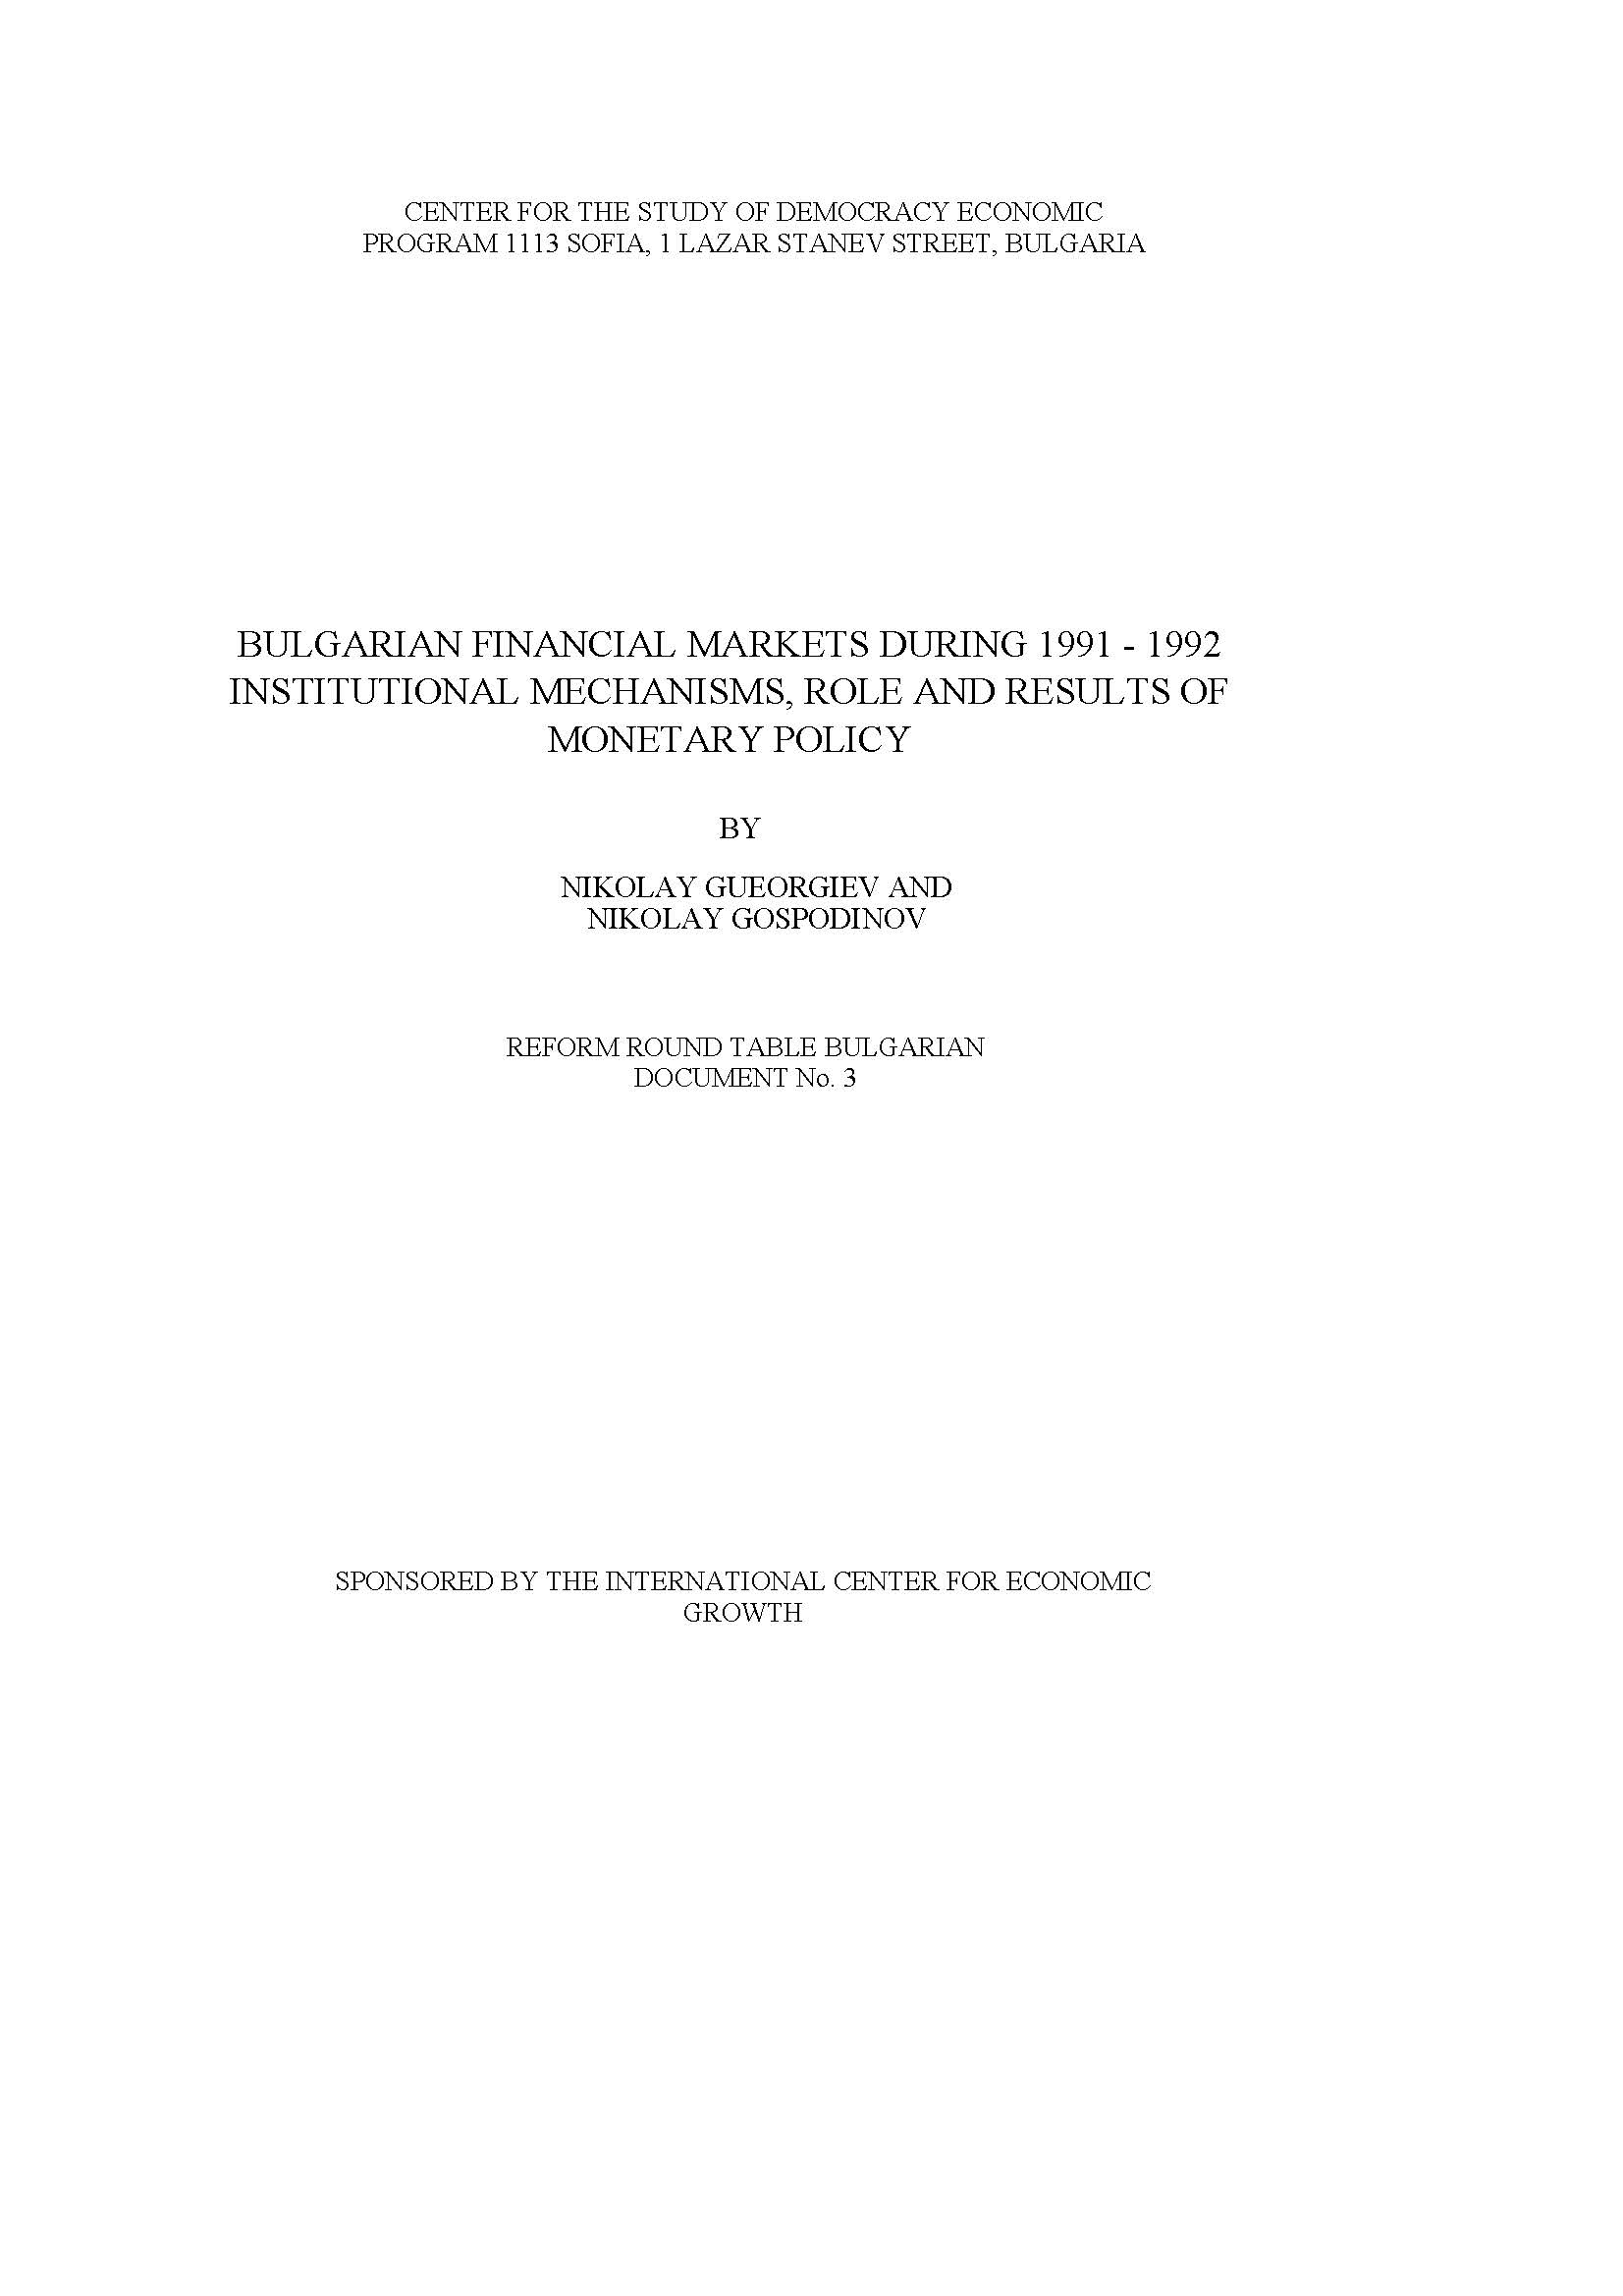 Bulgarian financial markets during 1991 - 1992. Institutional mechanisms, role and results of monetary policy